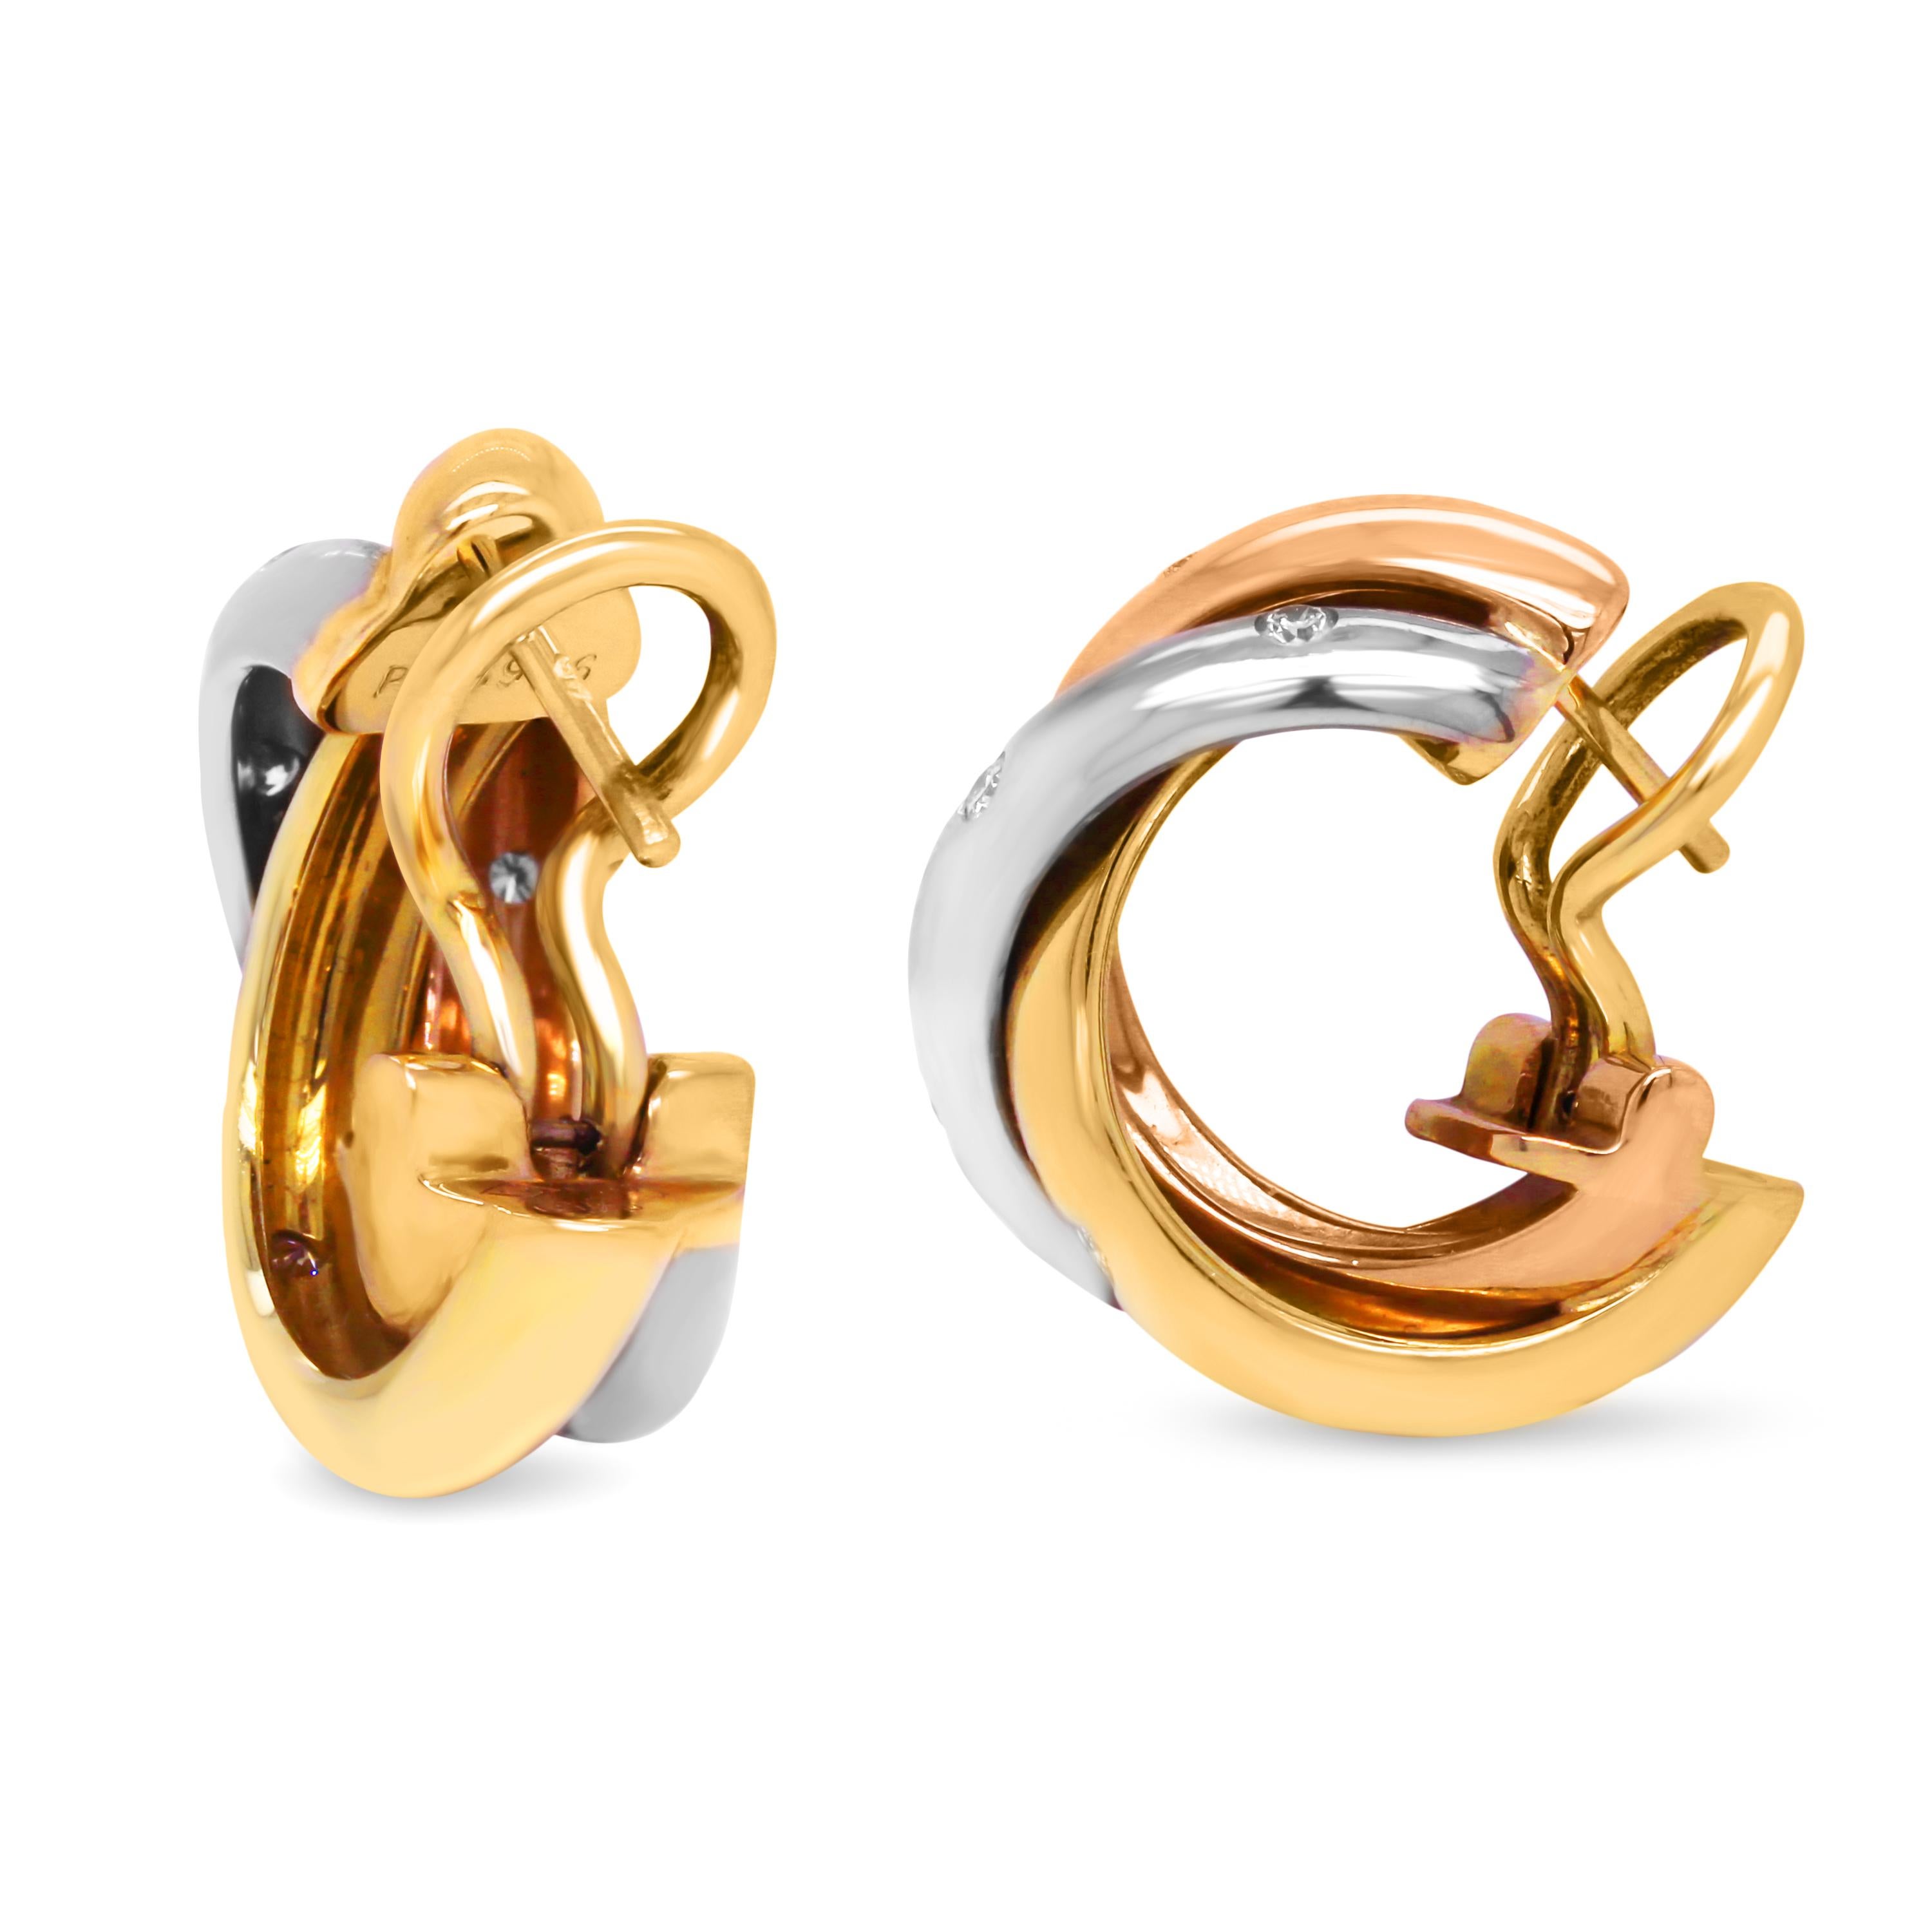 Cartier Trinity 18 Karat Tri-Color Rose Yellow White Gold Diamond Hoop Earrings

A touch of diamonds are set, totaling apprx. 0.08ct. 

Earring diameter 2.5cm (apprx. 1 inch)

Signed Cartier 750